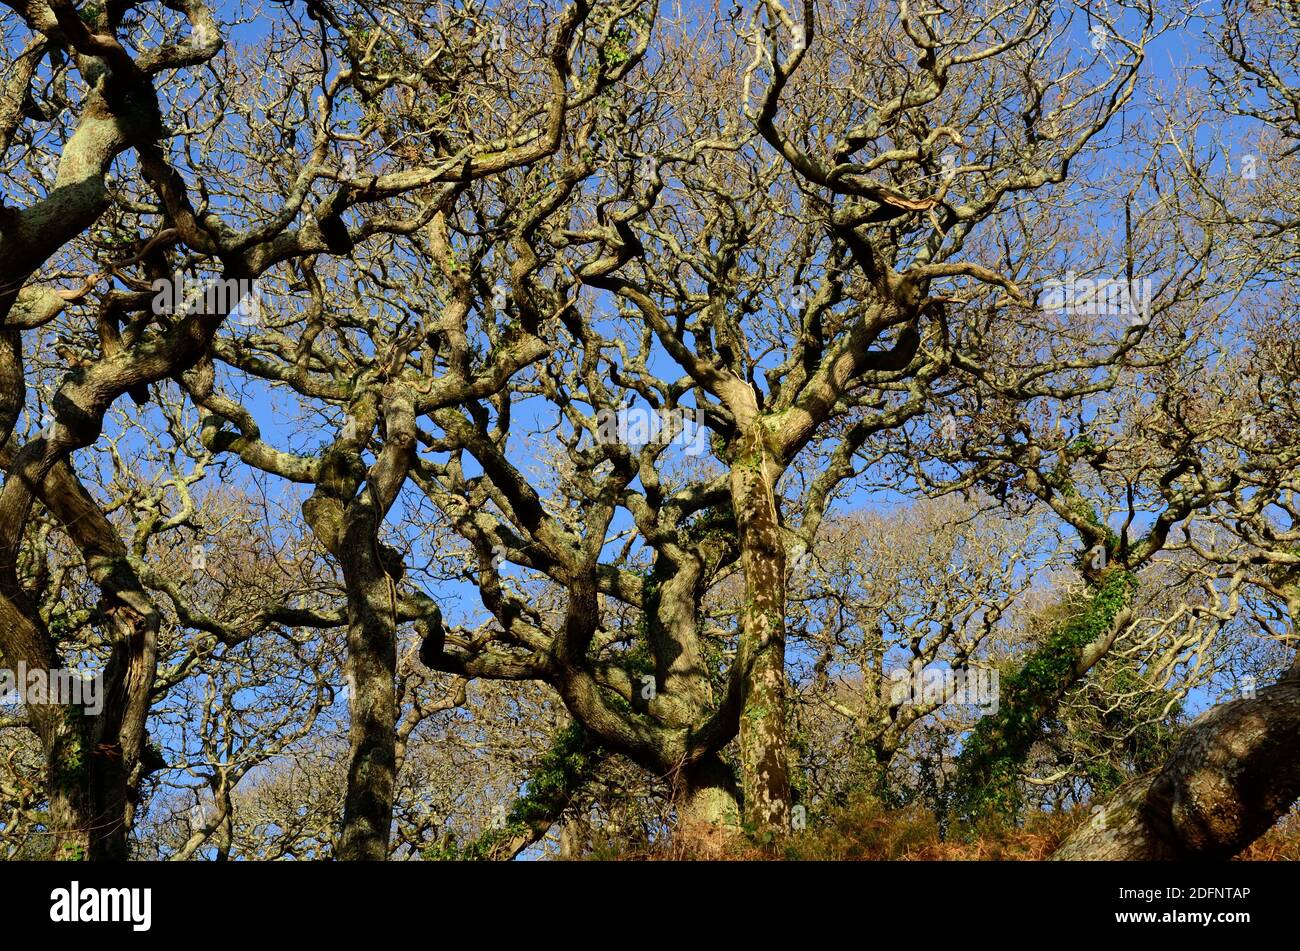 Twisted gnarled oak tree and branches Ancient oak woodlands of Lawrenny Pembrokeshire Wales UK against blue winter sky Stock Photo